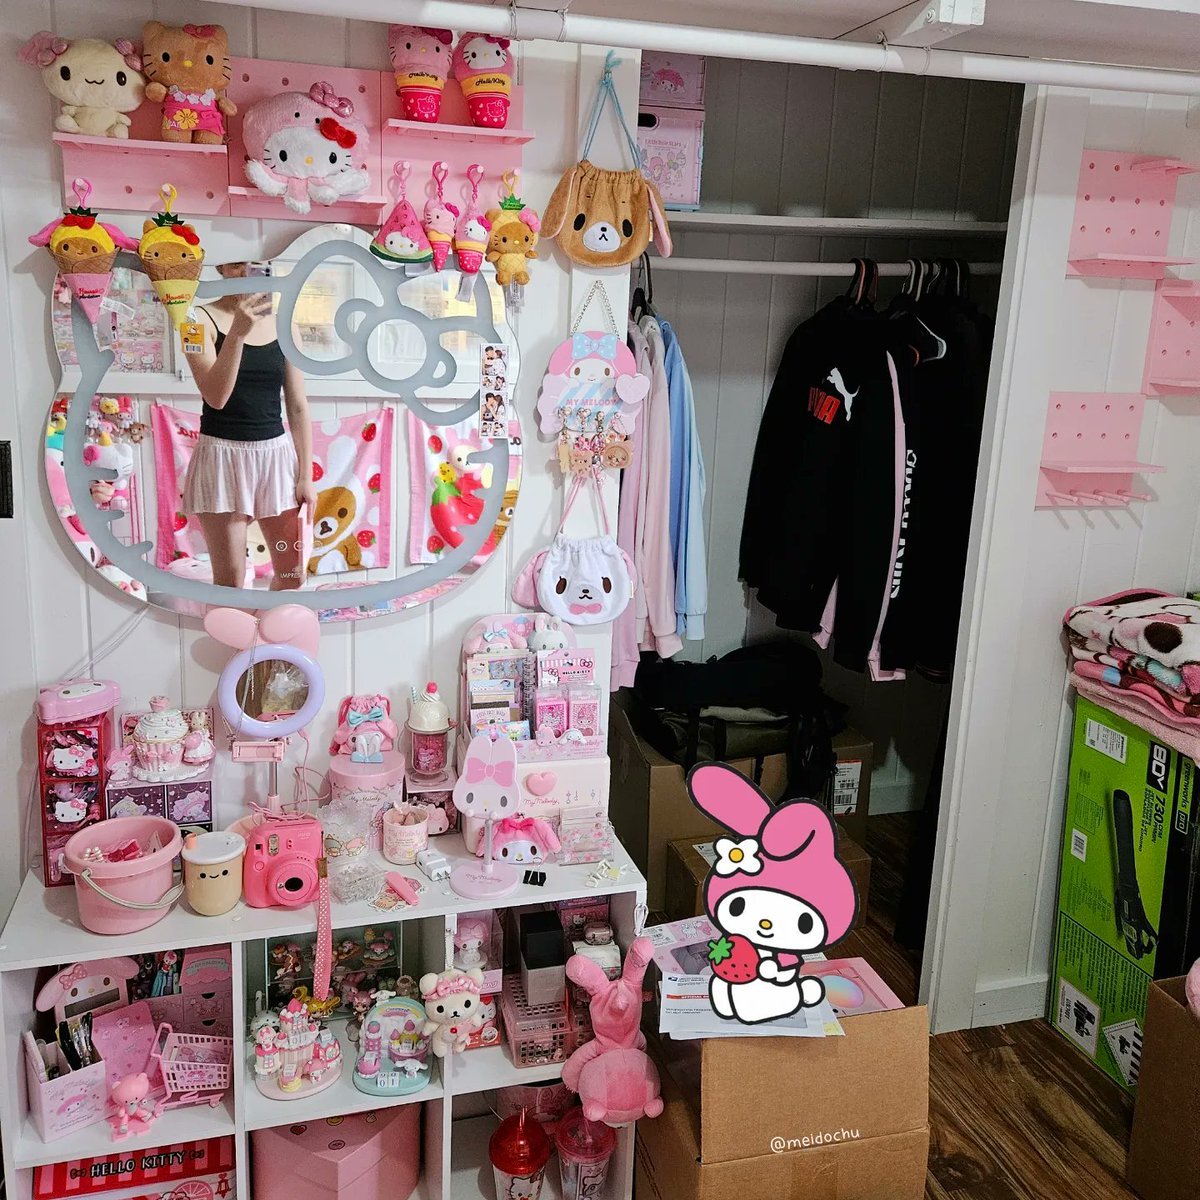 ♡ the reality of moving into your new room ✨️ 🥹🍨 almost done but still needs a lot of cleaning ♡

#sanrio #sanriogirl #sanrioroom #hellokitty #hellokittygirl #sanriogoals #impressionsvanity #mymelody